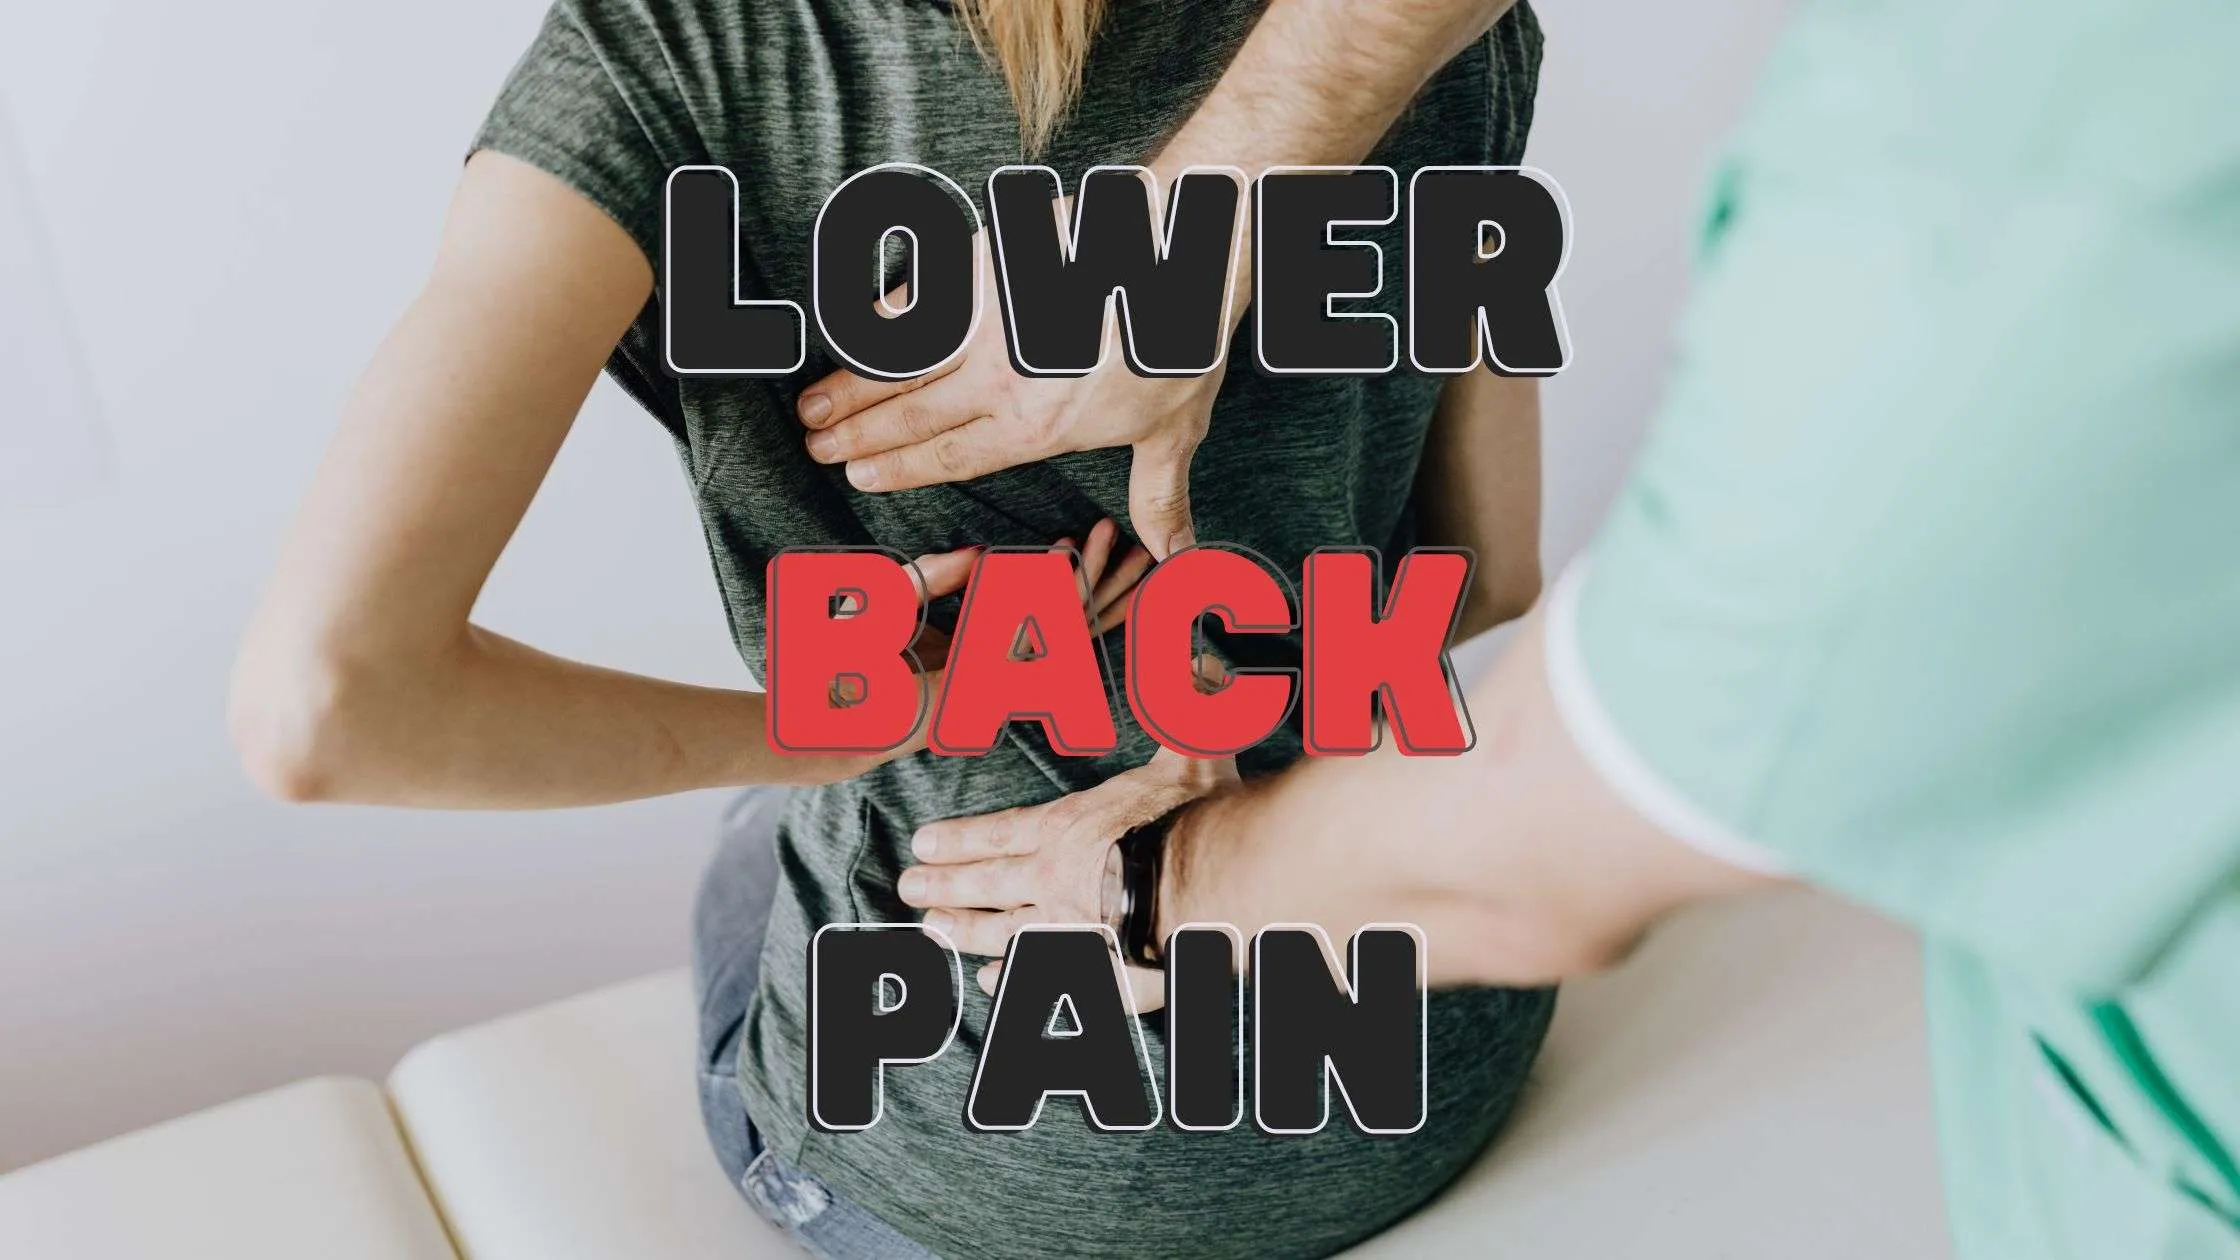 Treatment Options for Low Back Pain